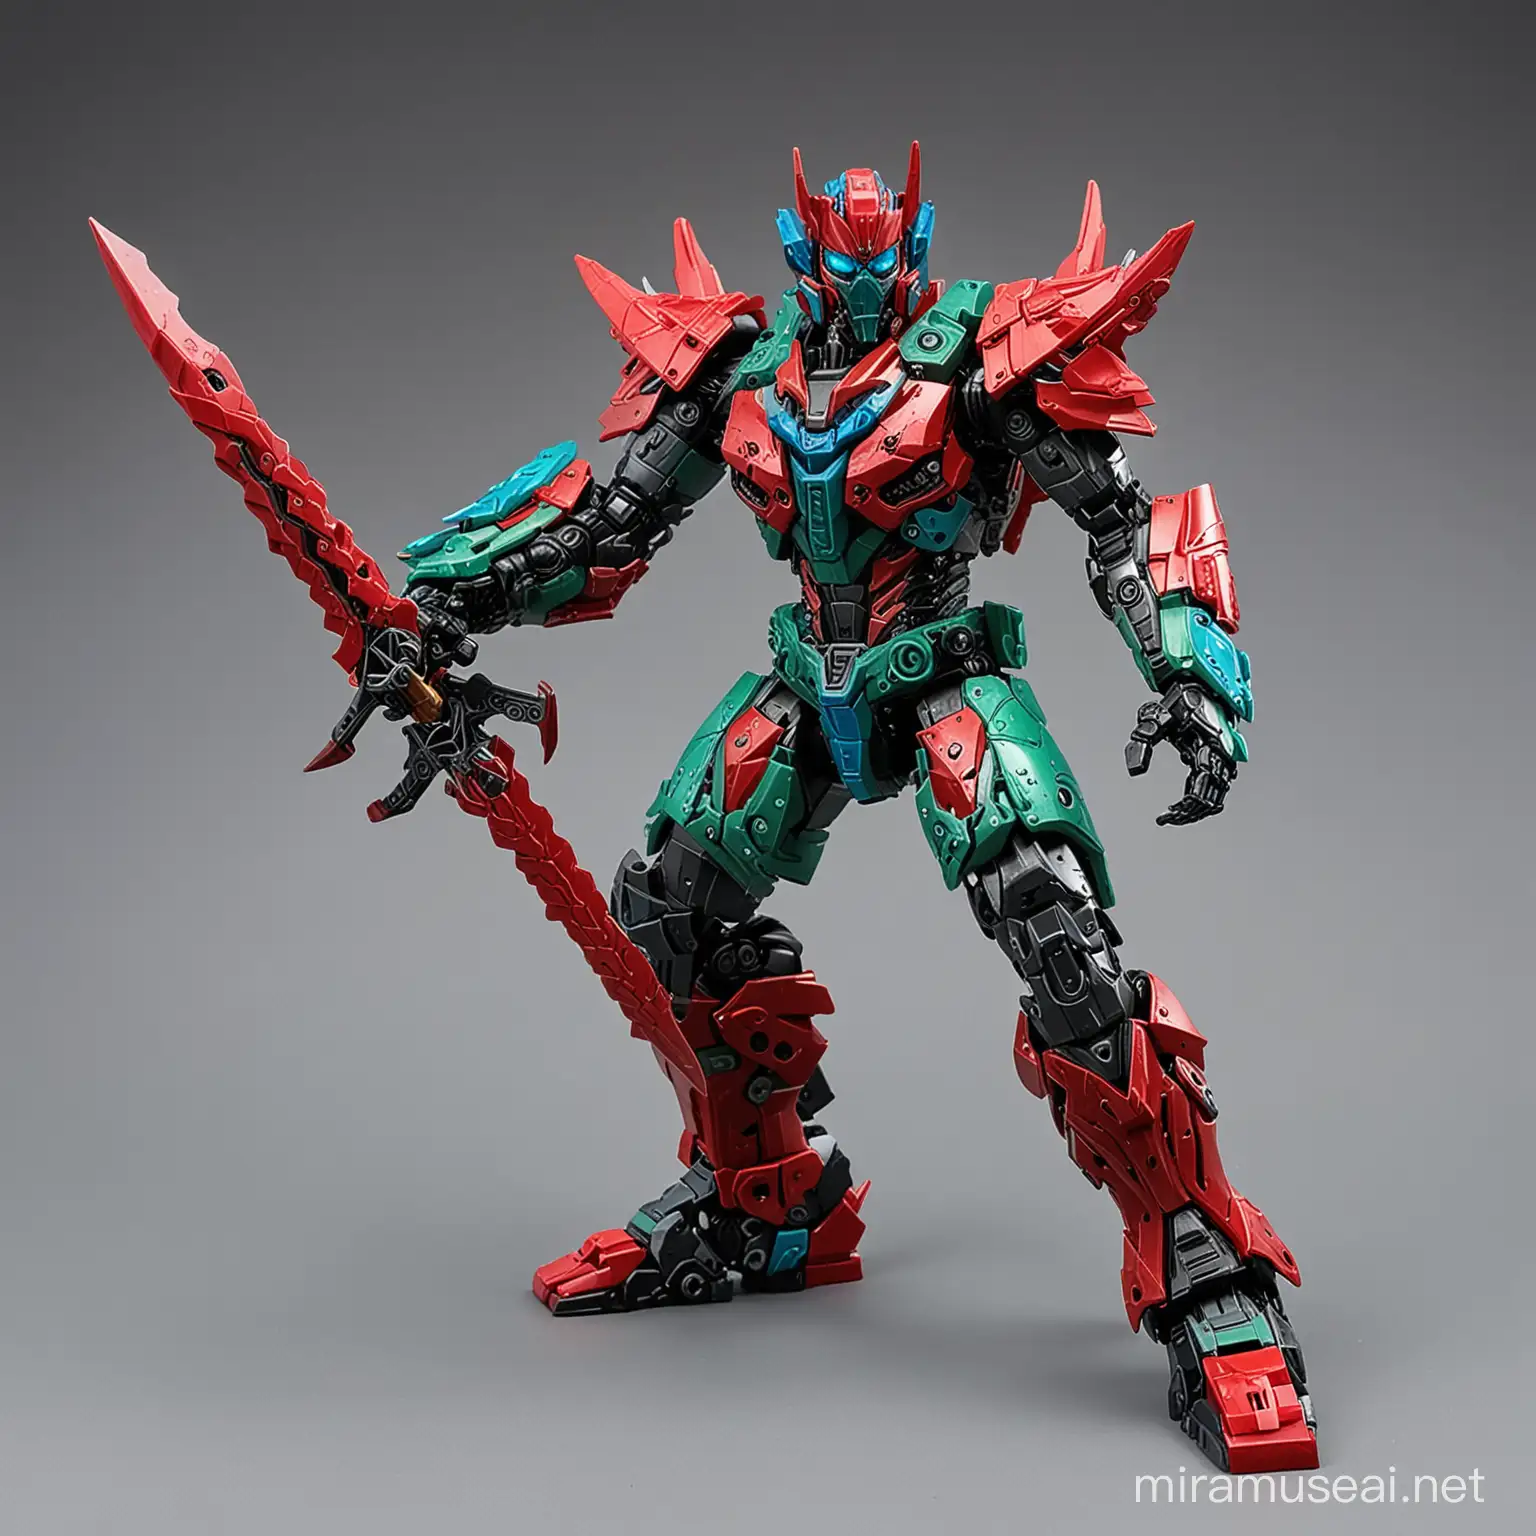 Fish Man Transformer in Red Blue Green and Black Color Battle Mode with Nebula Sword